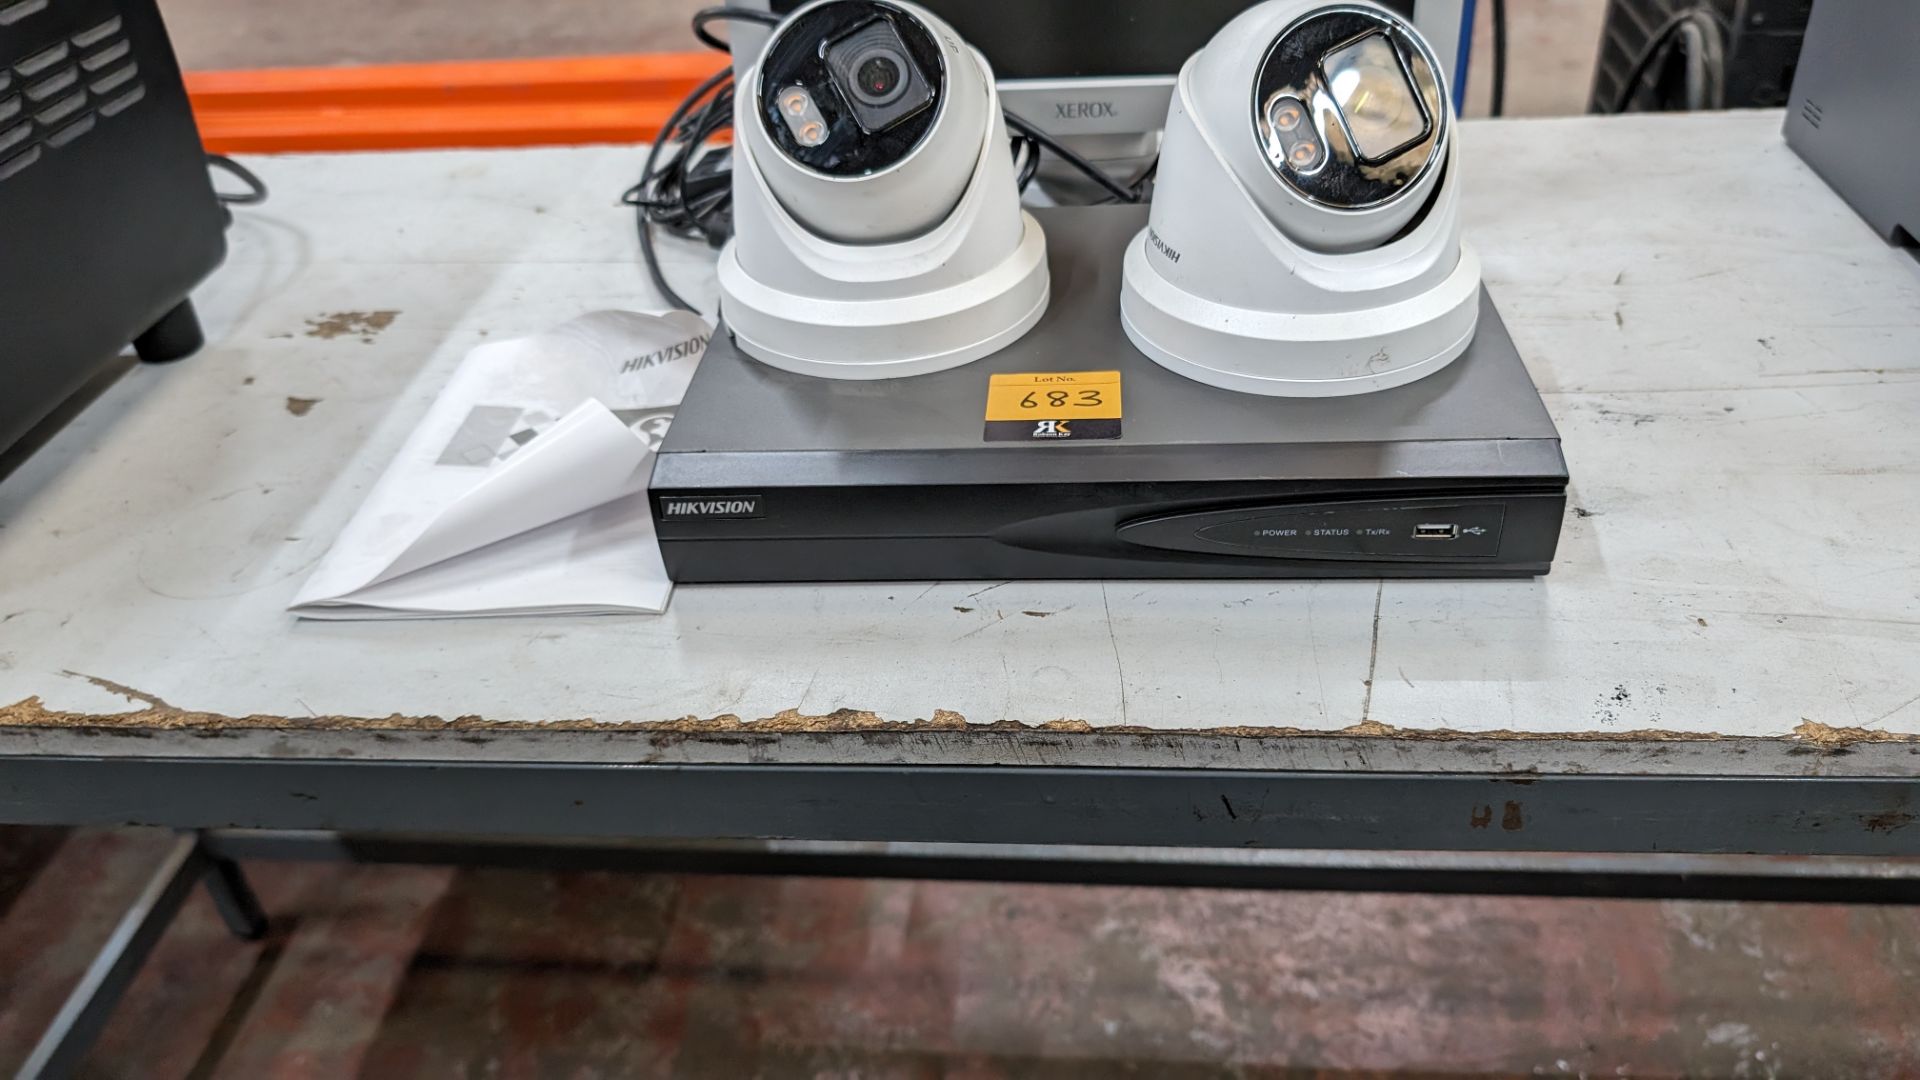 CCTV equipment comprising DVR, 2 off cameras and 1 off monitor - Image 3 of 6